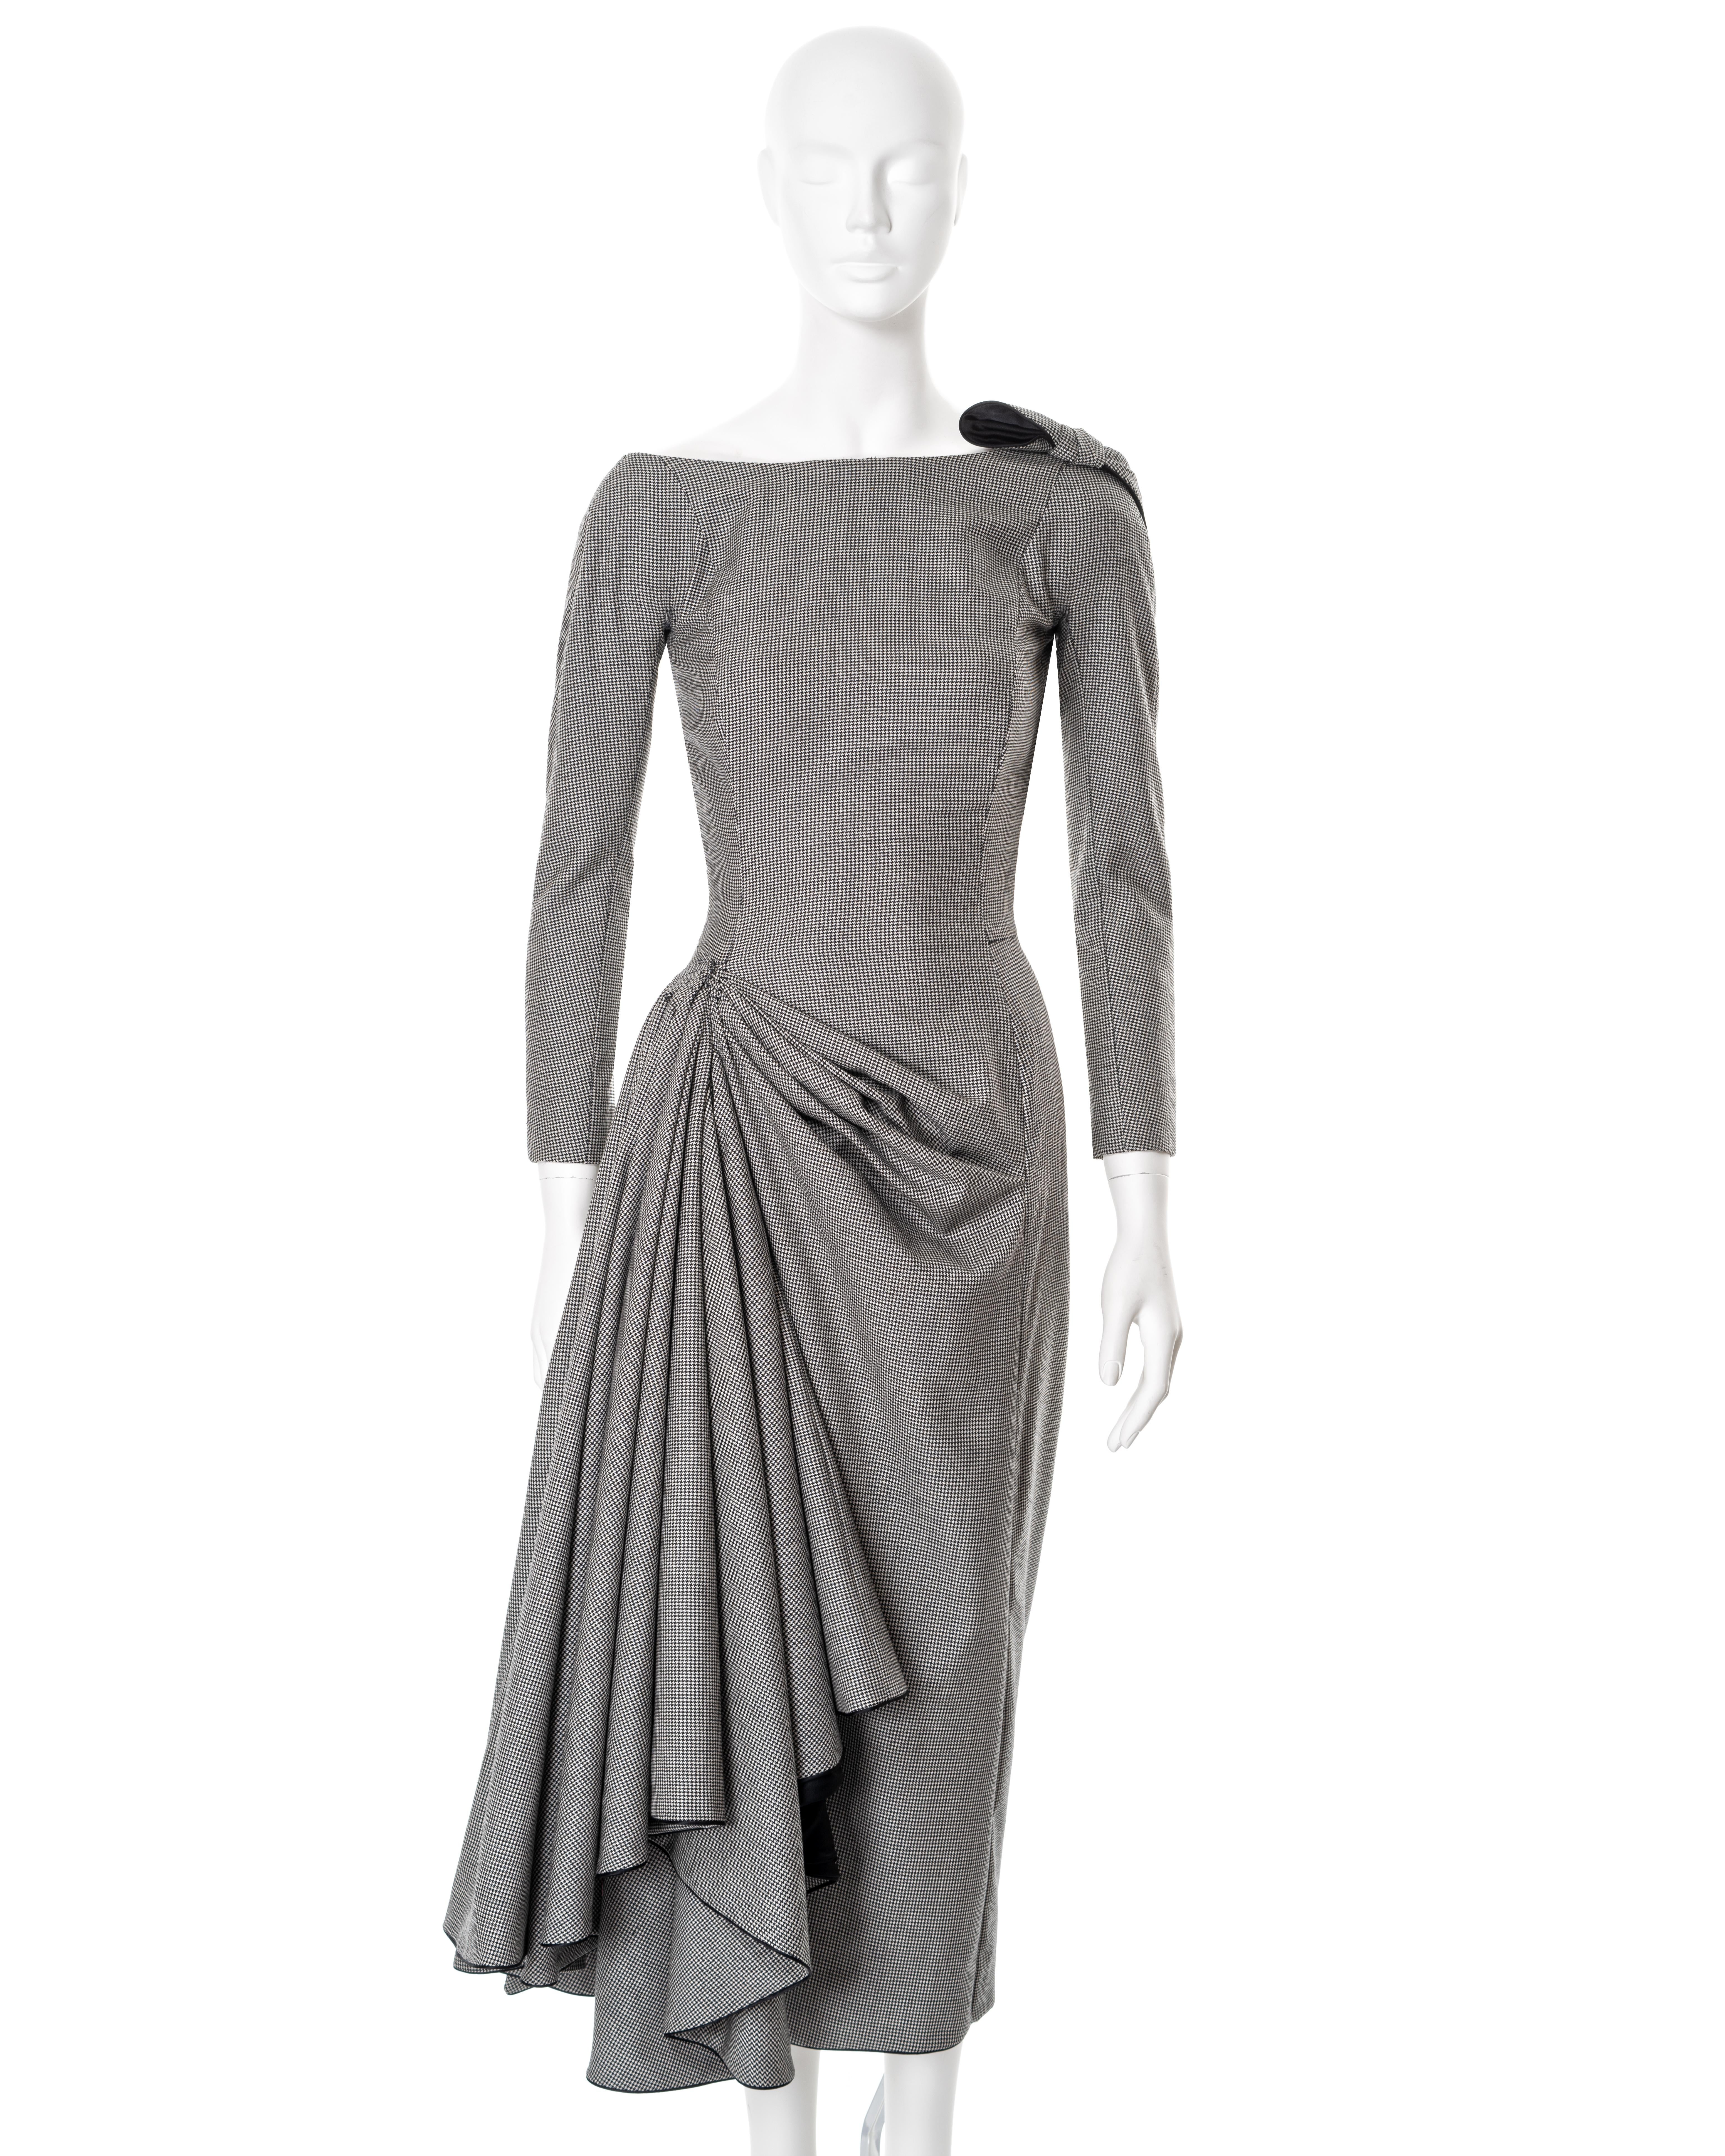 ▪ John Galliano draped wool cocktail dress
▪ Sold by One of a Kind Archive
▪ “Pin-up/ Misia Sert”, Spring-Summer 1995
▪ Museum grade
▪ Constructed from black and white houndstooth check wool 
▪ Calf-length pencil skirt with asymmetric drape to the